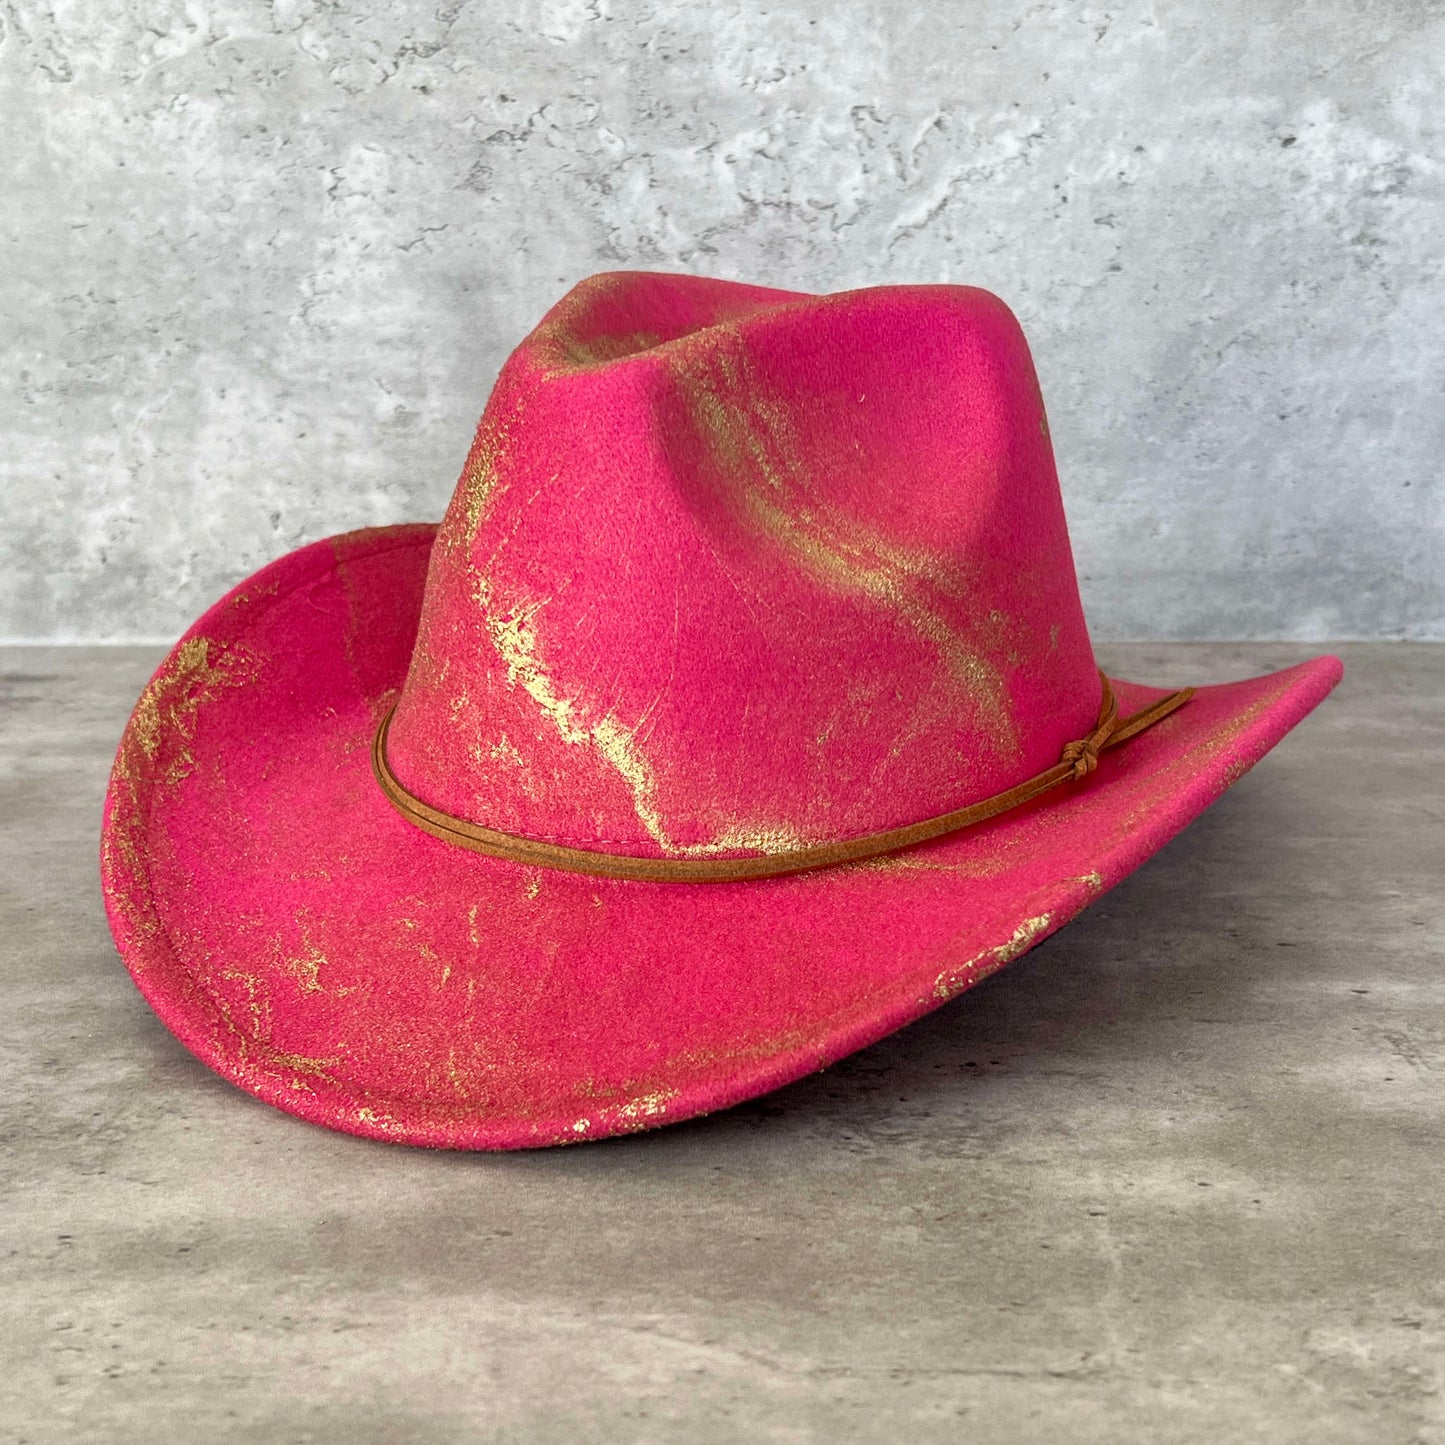 Hot pink fuchsia western cowboy hat painted with gold marbling. Has light brown faux suede cord hat band. 